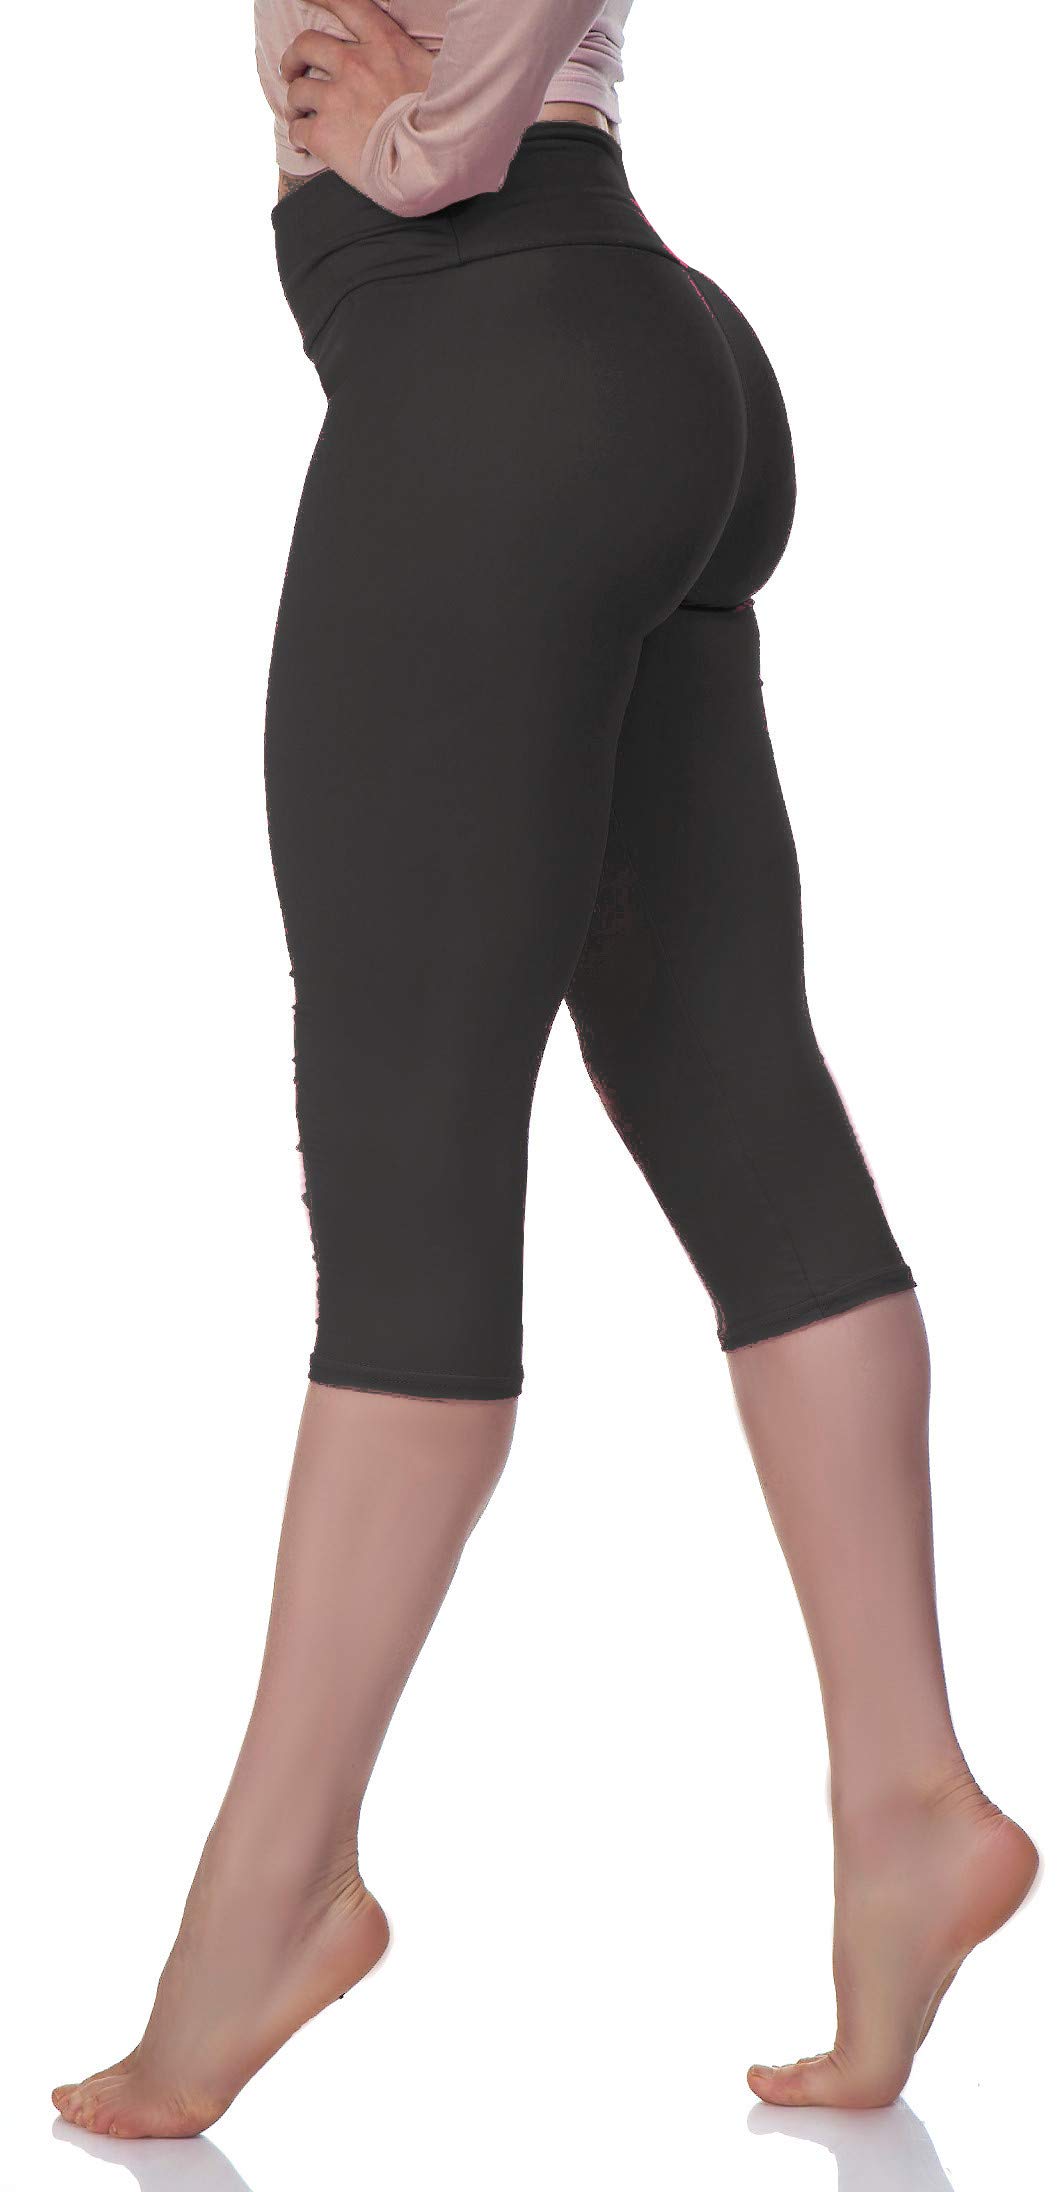 Lush Moda Leggings for Women - Ultra High Waisted - Solid Colors - Stretchy and Buttery Soft